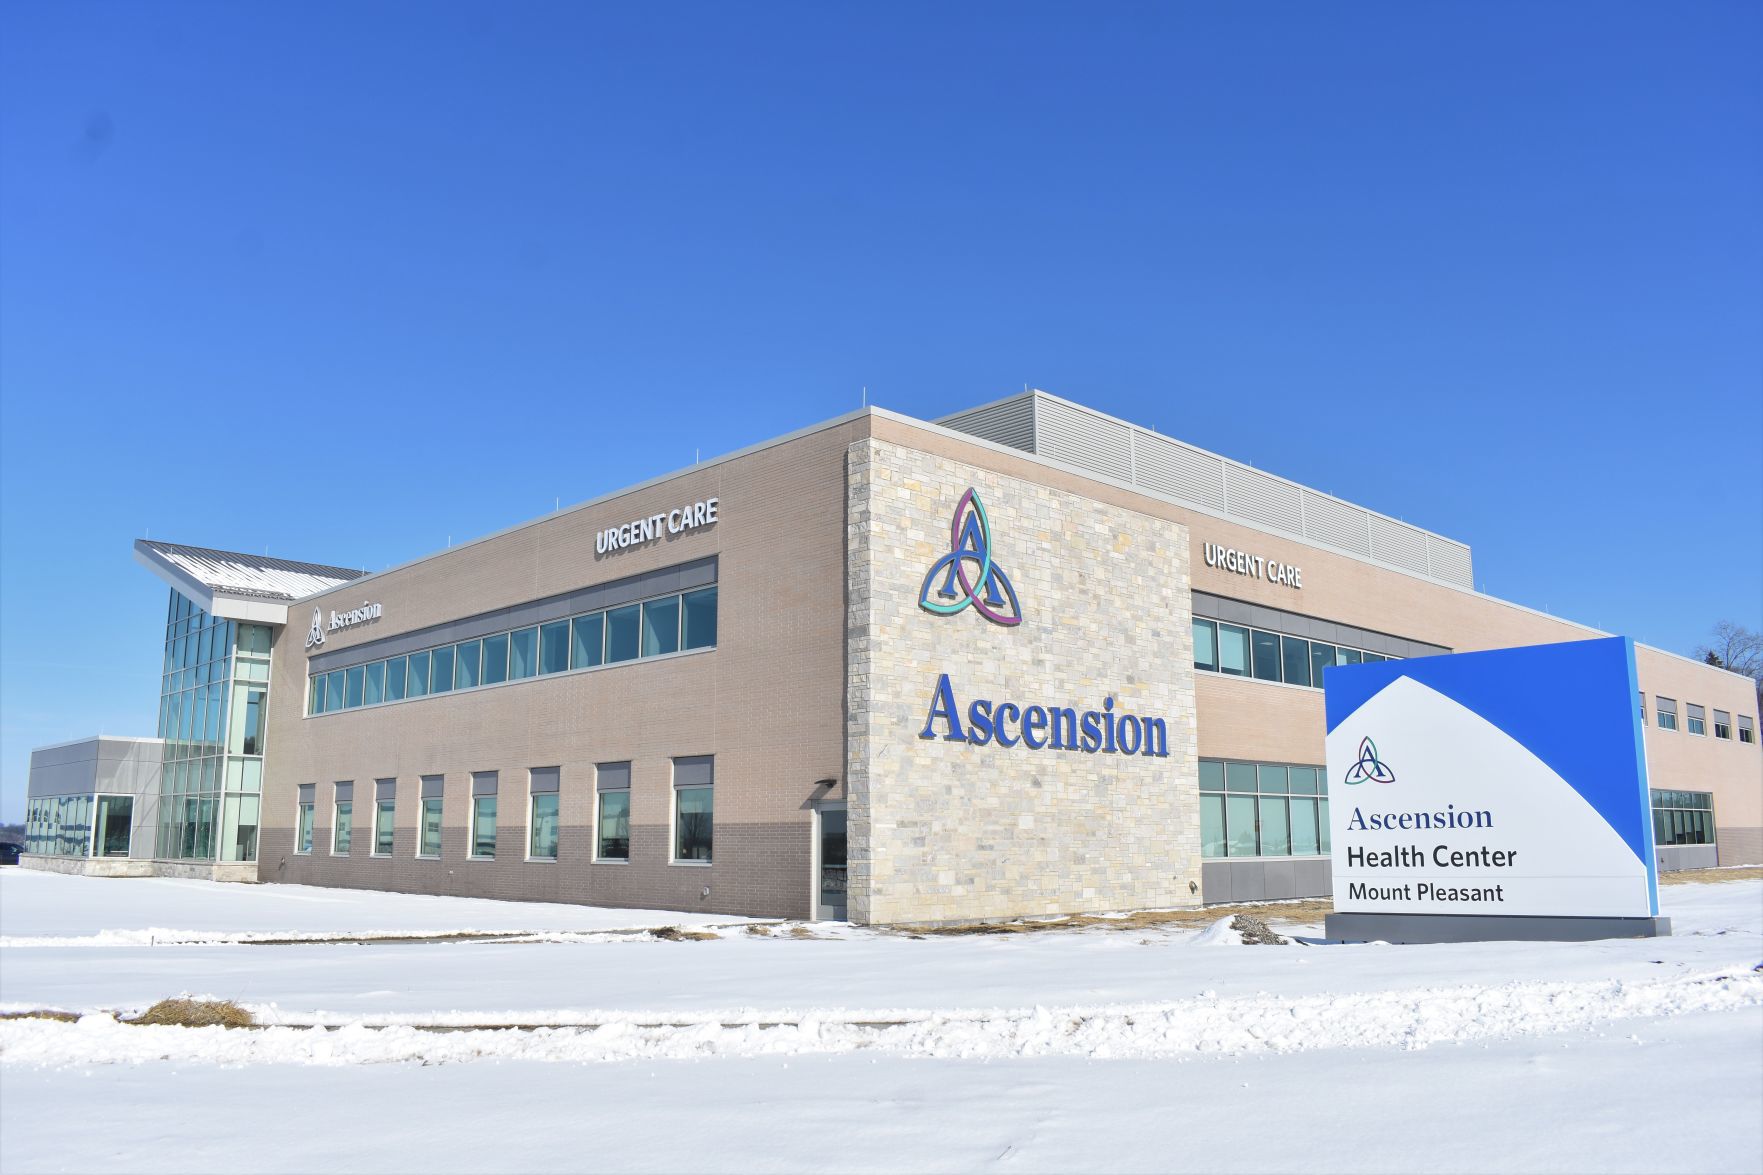 ascension occupational health